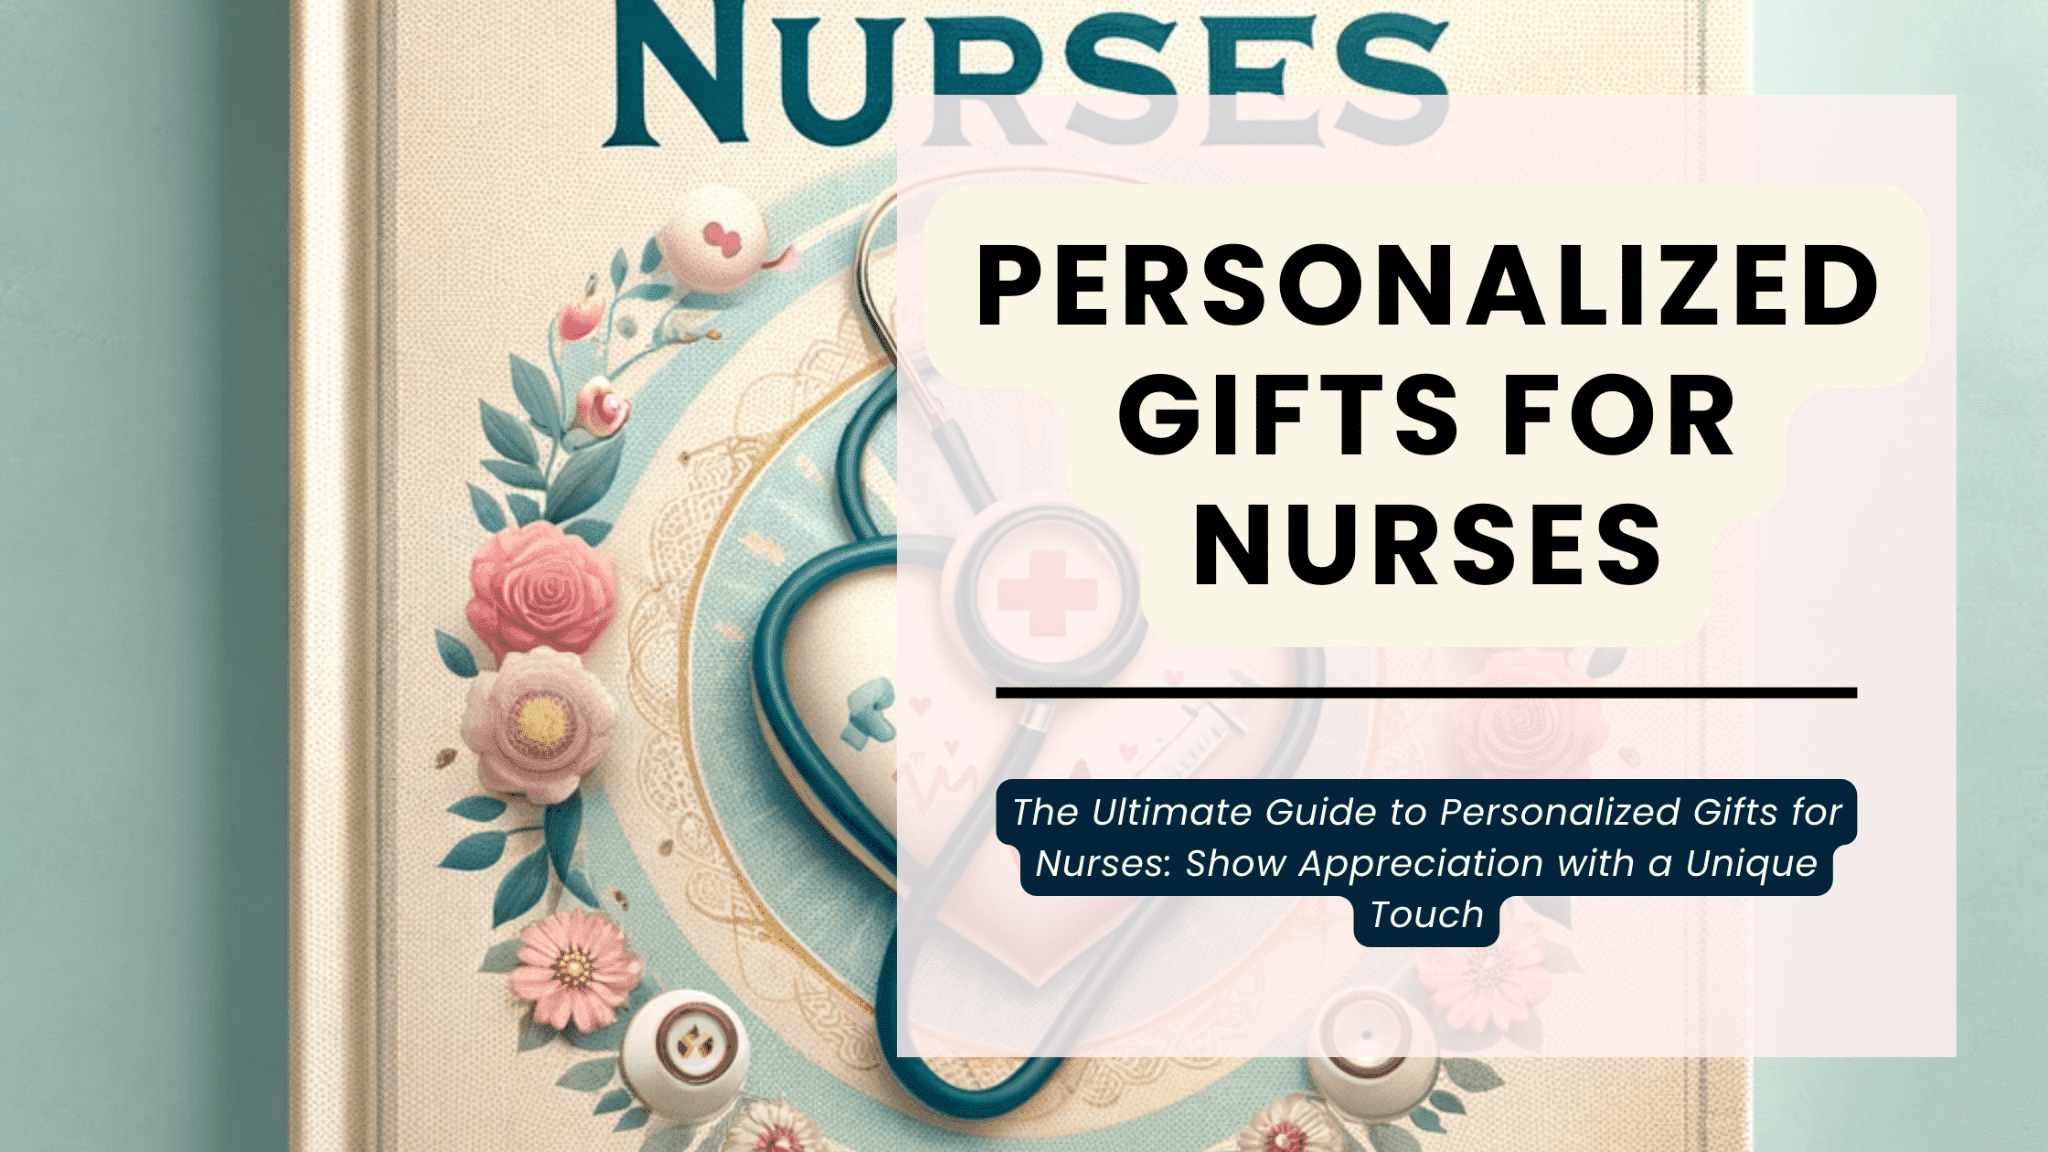 The Ultimate Guide to Personalized Gifts for Nurses: Show Appreciation with a Unique Touch